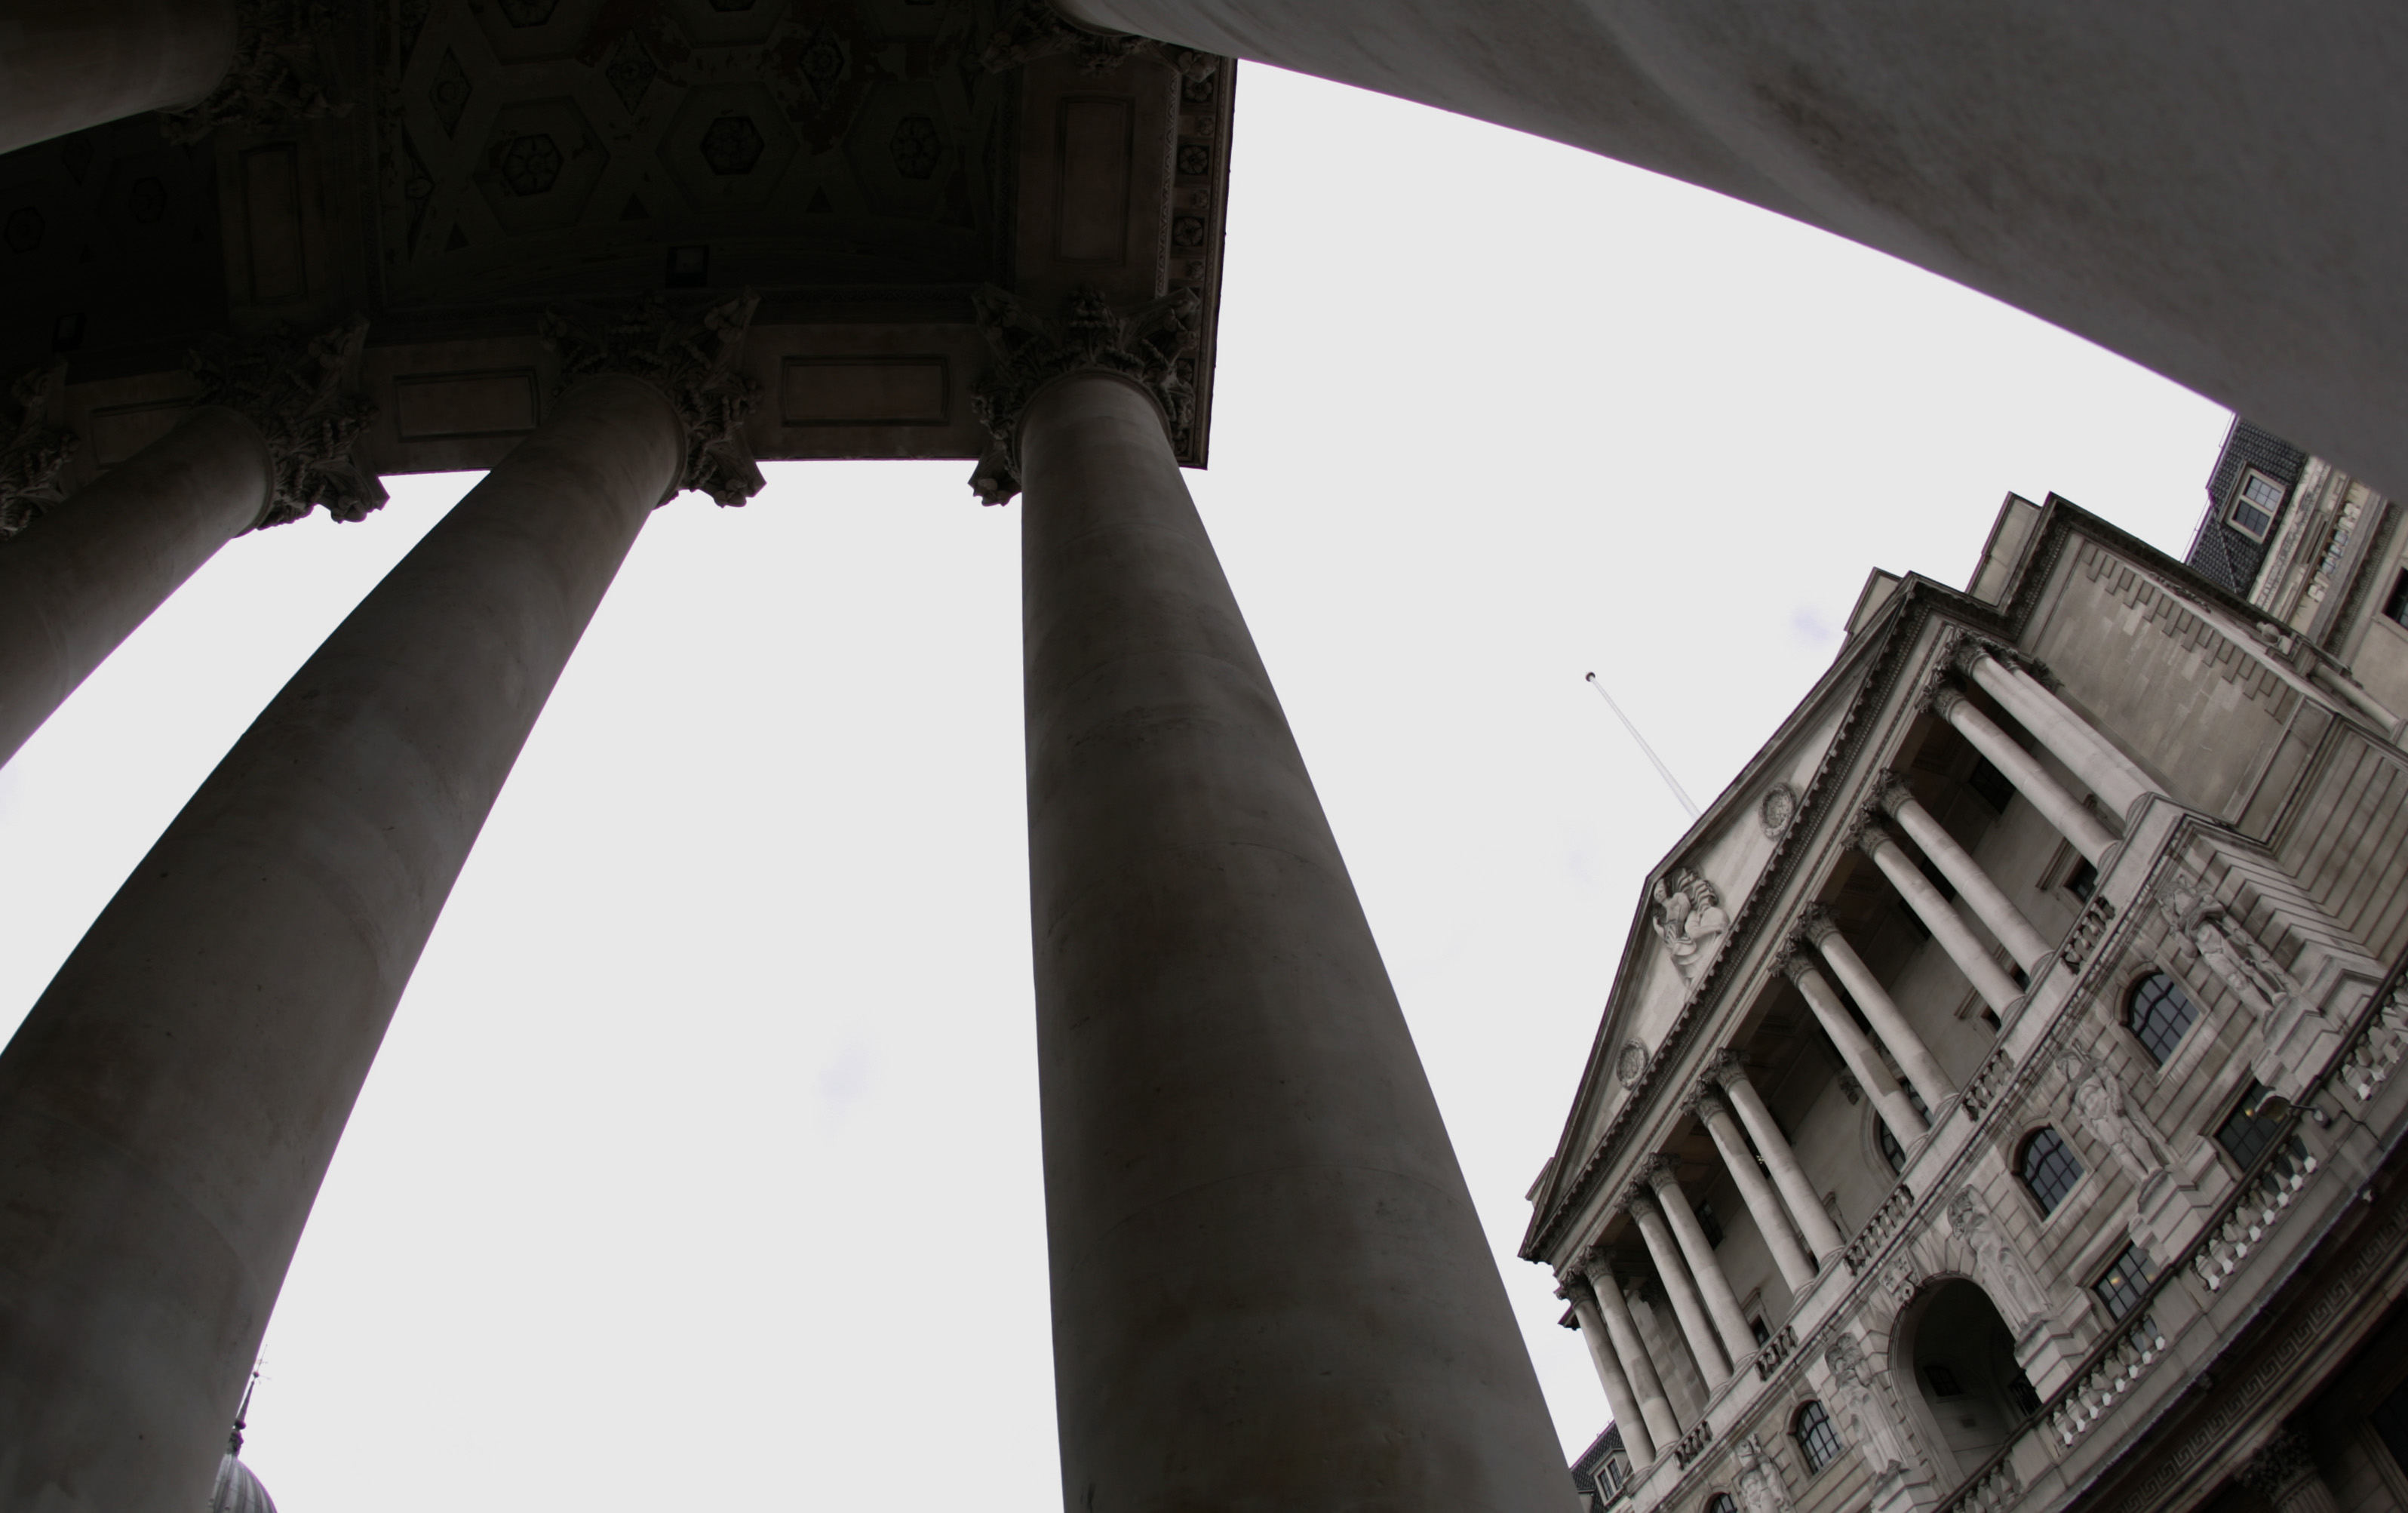 The Bank of England is seen through the columns of a neighbouring building in London